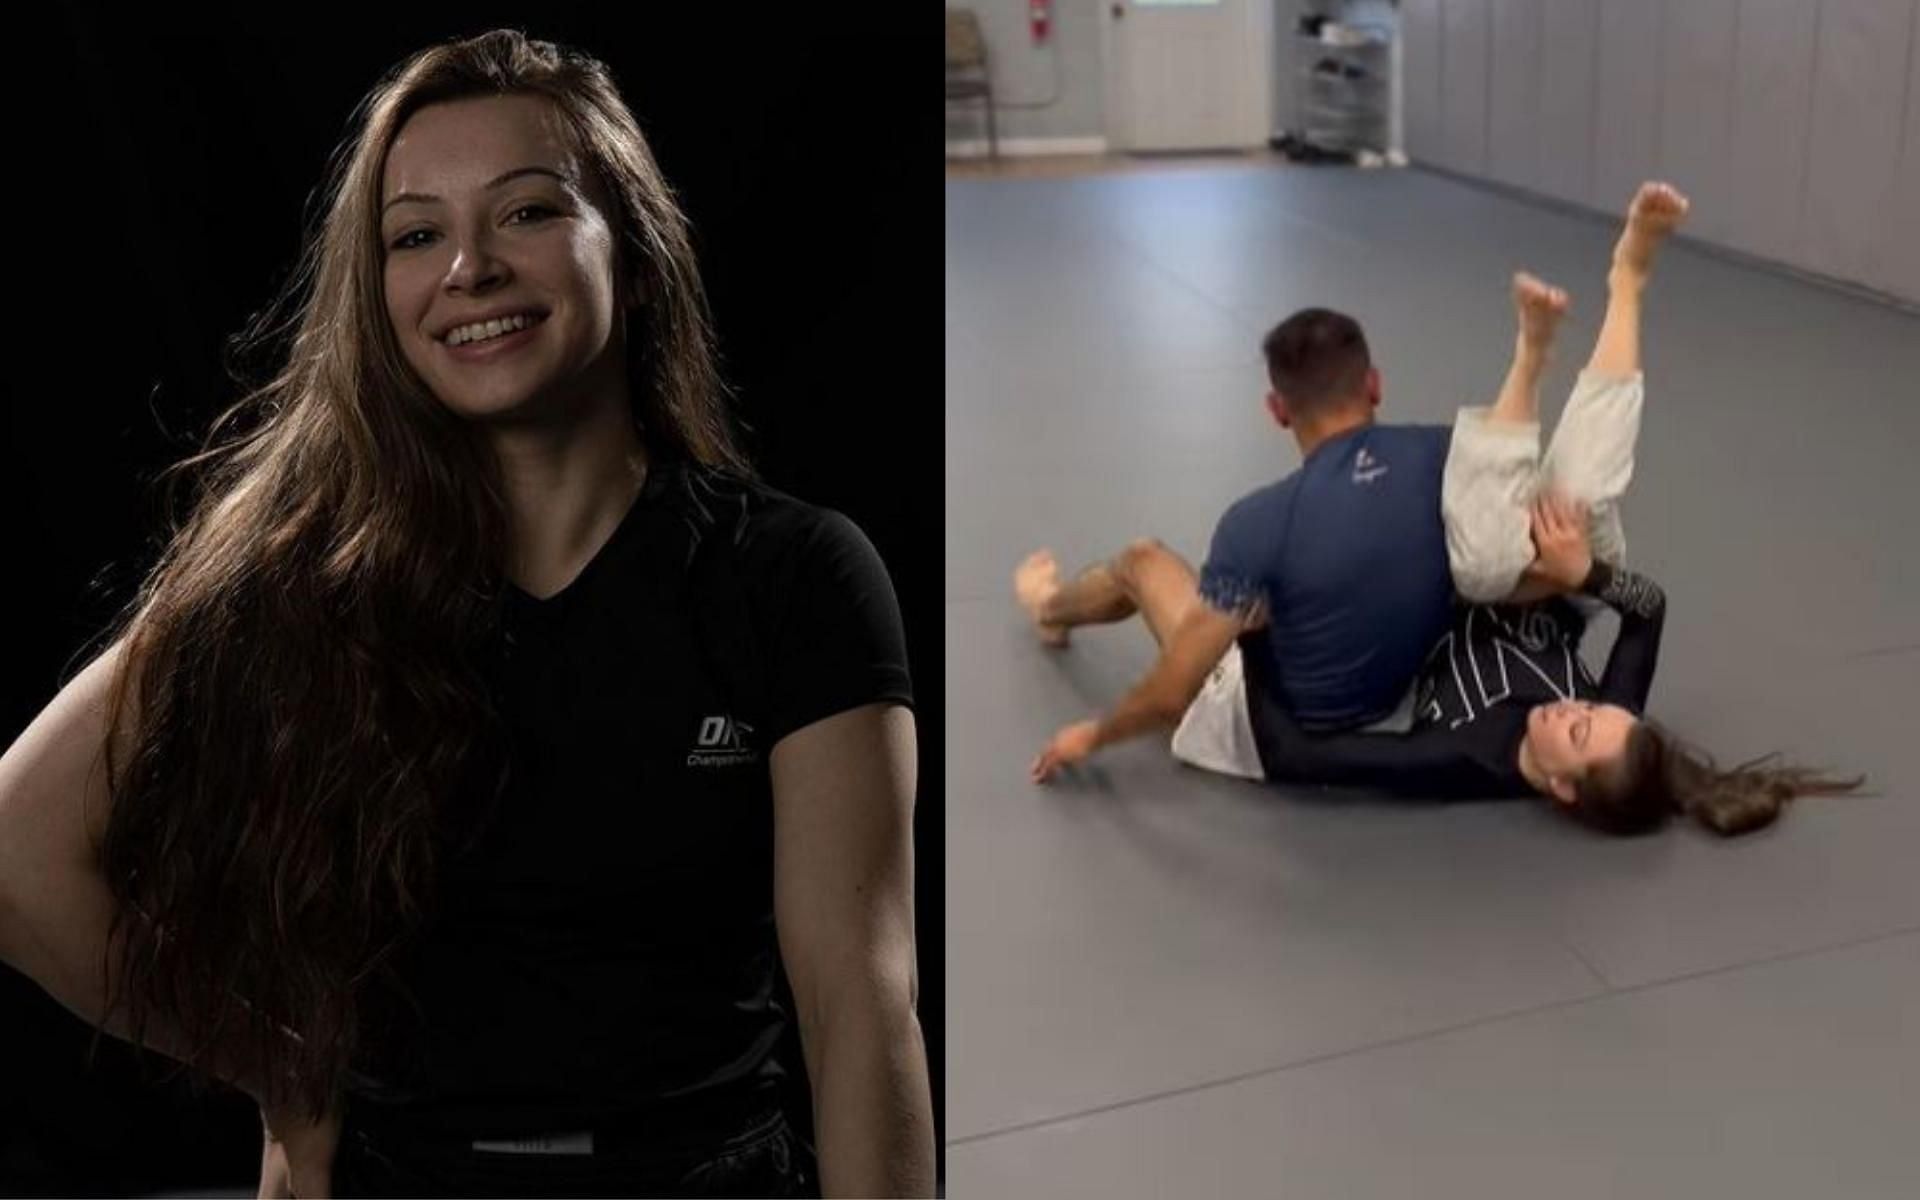 ONE Championship jiu-jitsu star Danielle Kelly shows a cool counter to the Omoplata counter. (Images courtesy of @daniellekellybjj on Instagram)